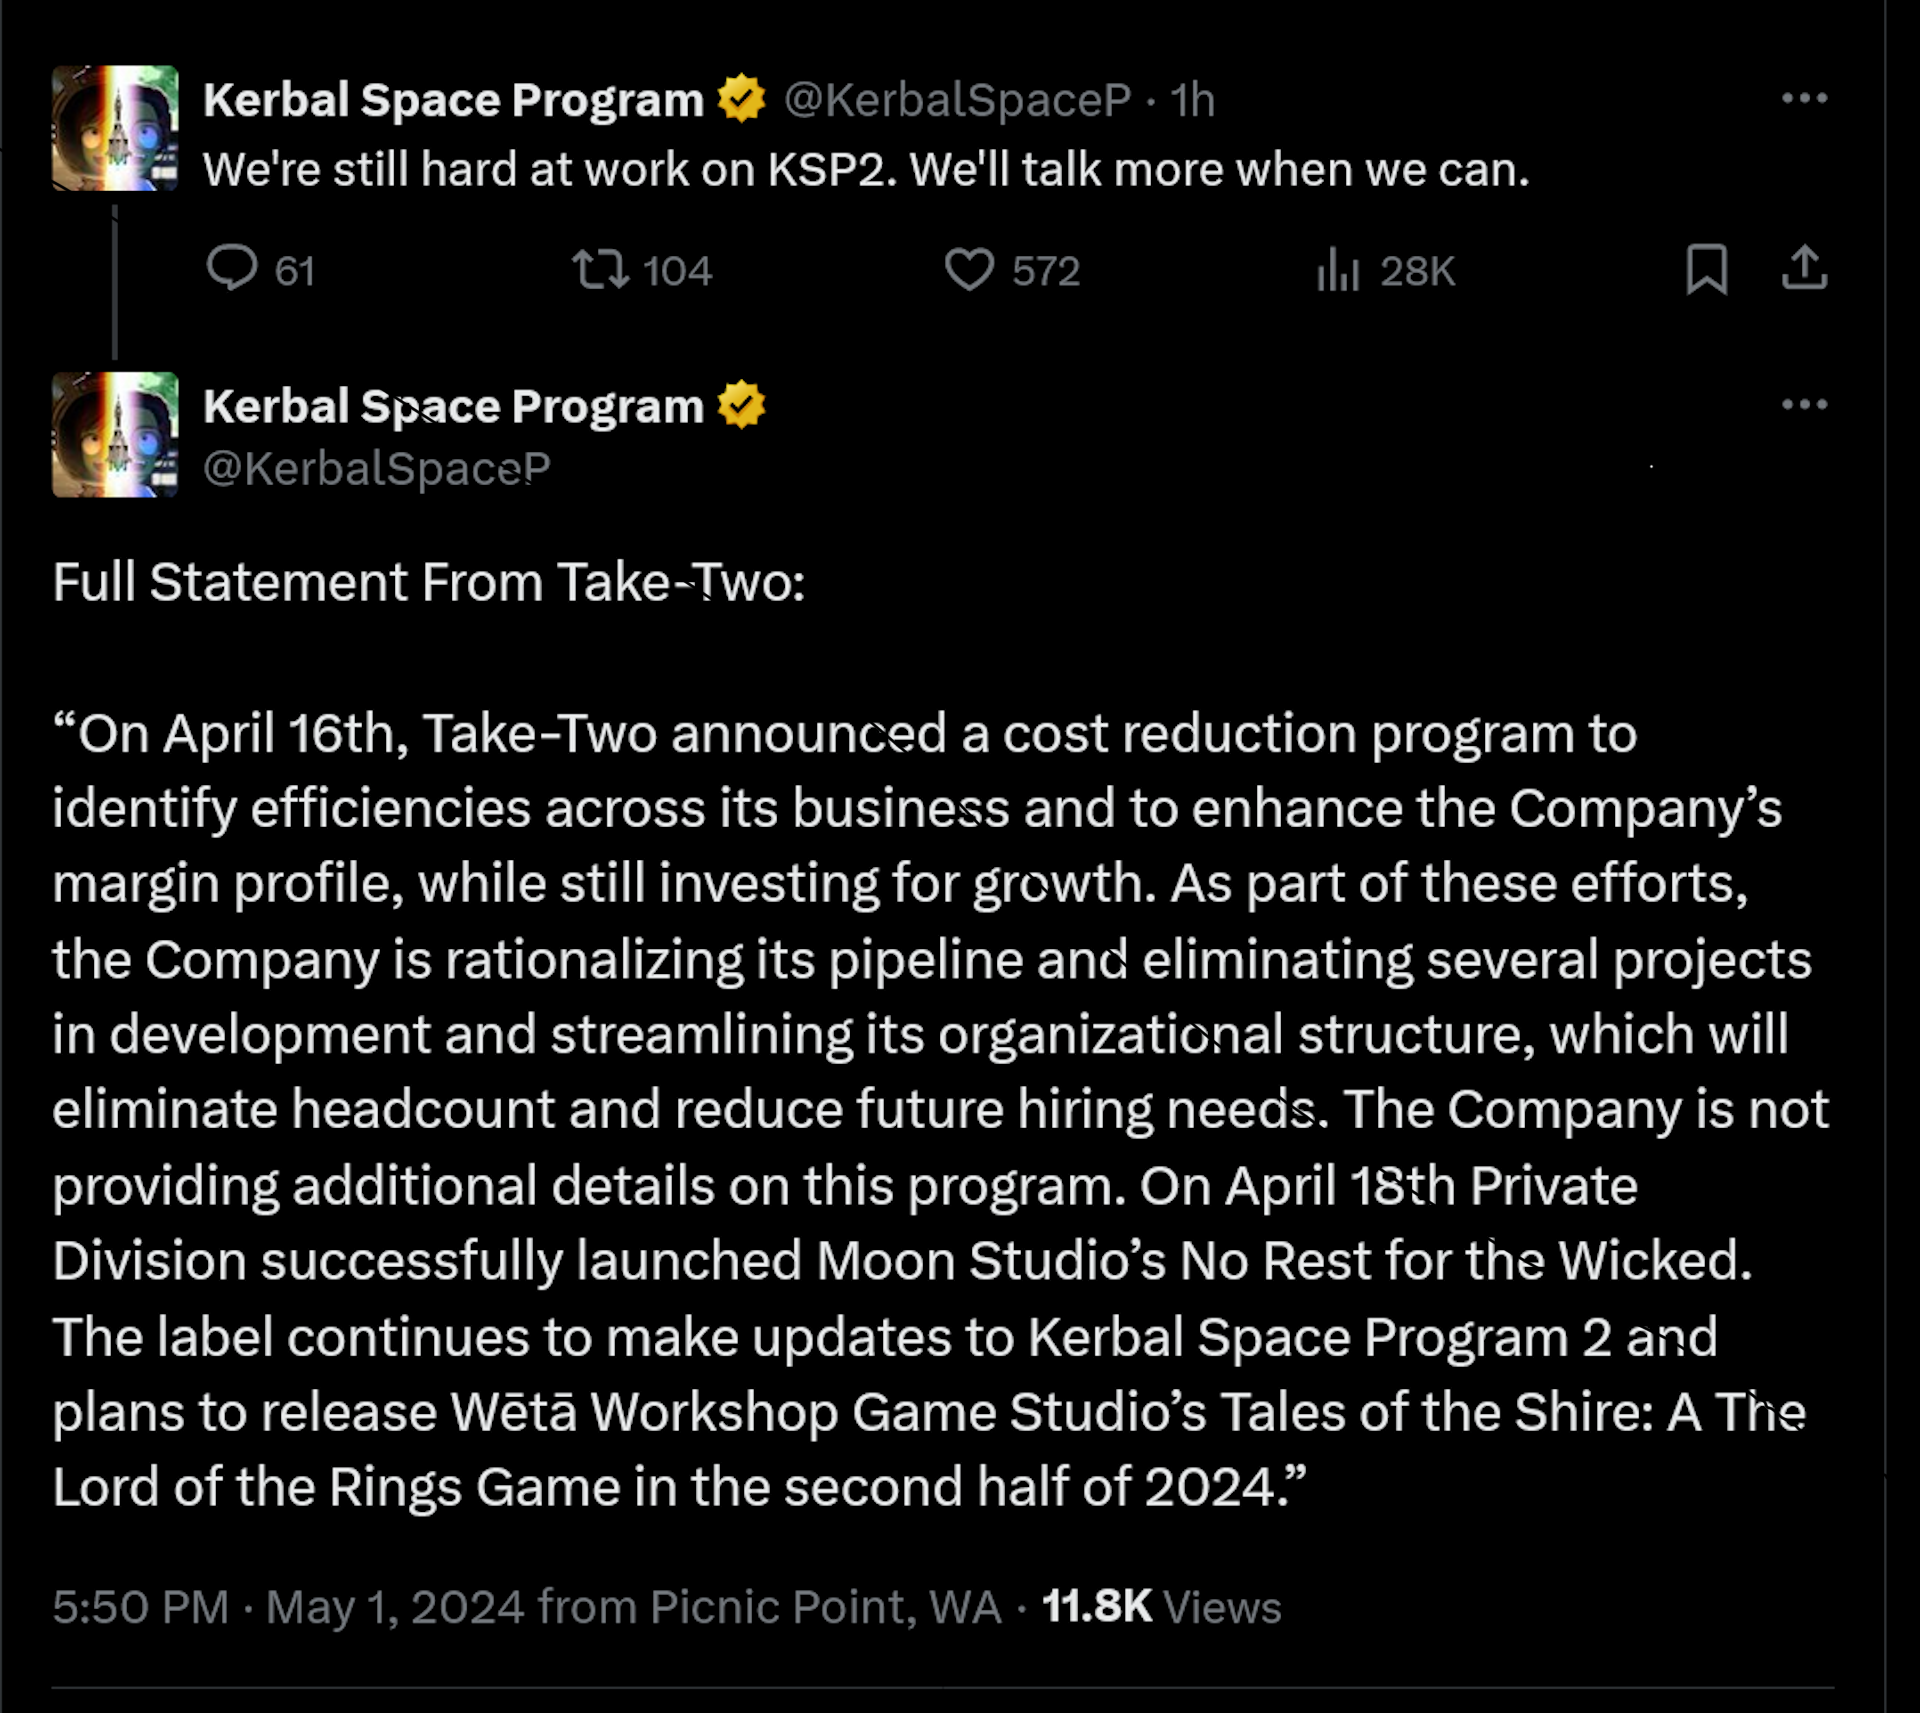 We're still hard at work on KSP2. We'll talk more when we can. Full Statement From Take-Two:  “On April 16th, Take-Two announced a cost reduction program to identify efficiencies across its business and to enhance the Company’s margin profile, while still investing for growth. As part of these efforts, the Company is rationalizing its pipeline and eliminating several projects in development and streamlining its organizational structure, which will eliminate headcount and reduce future hiring needs. The Company is not providing additional details on this program. On April 18th Private Division successfully launched Moon Studio’s No Rest for the Wicked. The label continues to make updates to Kerbal Space Program 2 and plans to release Wētā Workshop Game Studio’s Tales of the Shire: A The Lord of the Rings Game in the second half of 2024.”